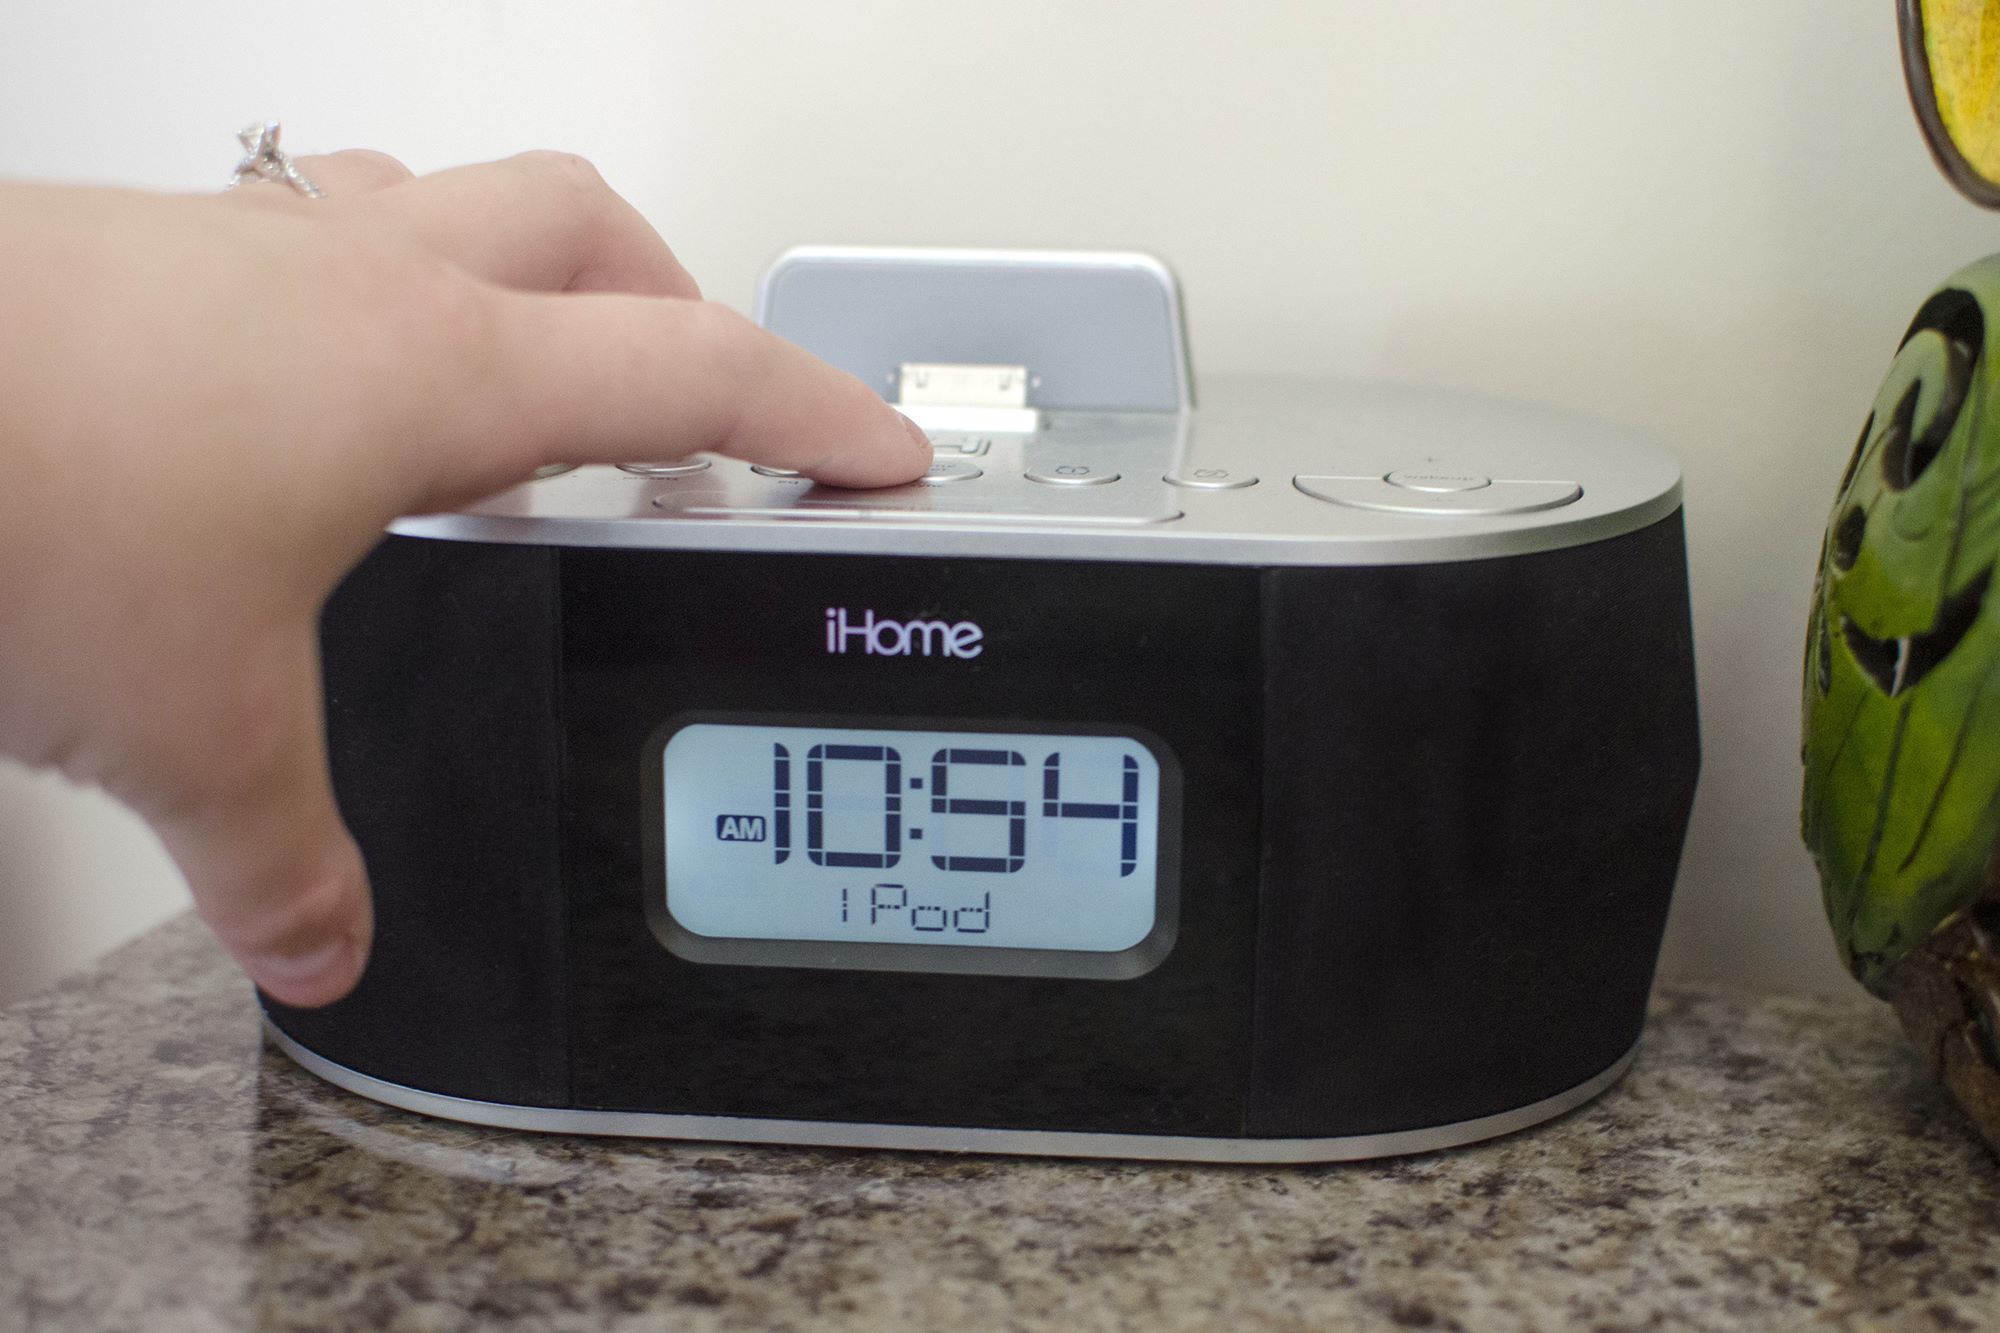 Setting The Time On An IHome Docking Station: Step-by-Step Instructions